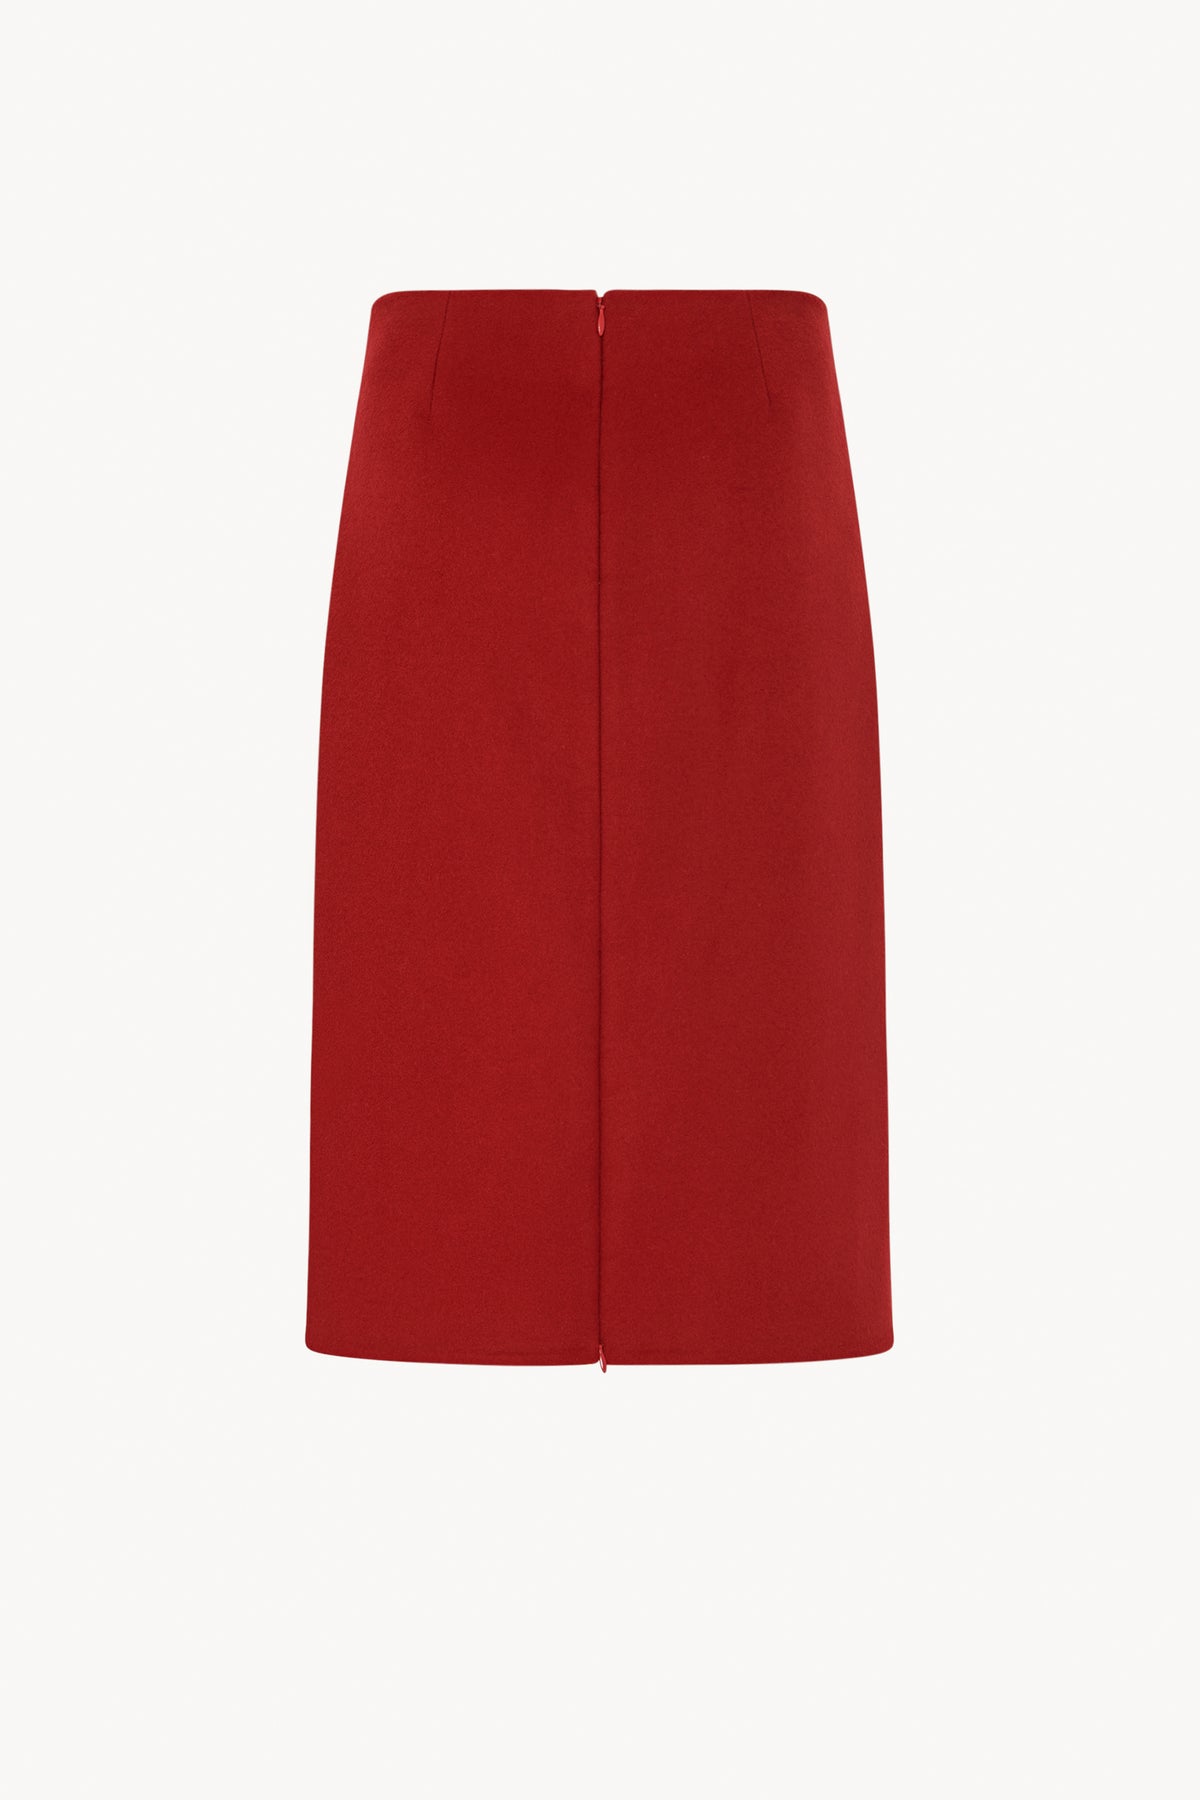 Bart Skirt in Cashmere